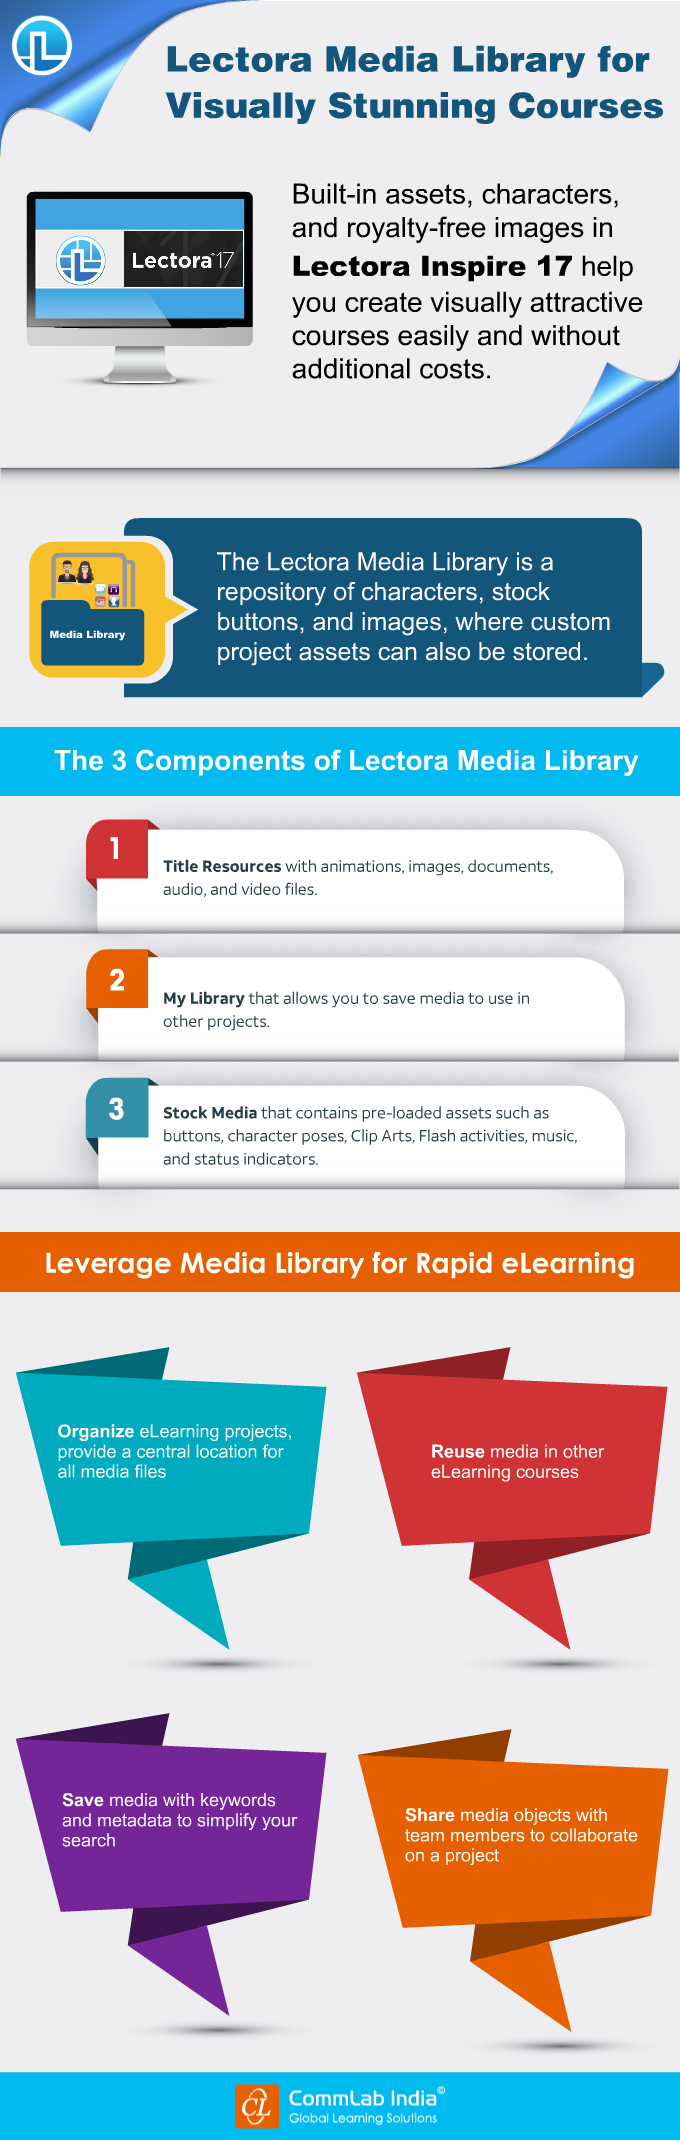 Lectora Media Library for Visually Stunning Courses [Infographic]